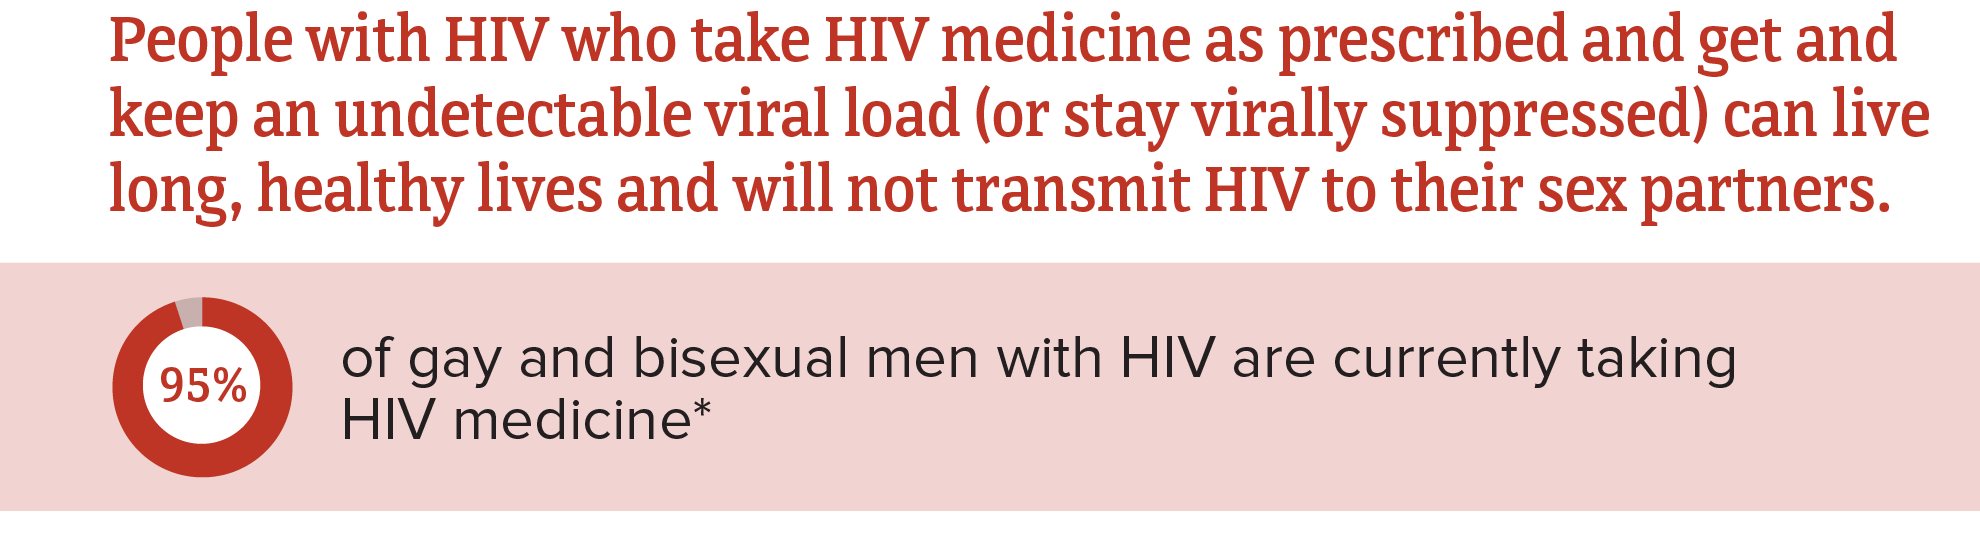 This chart shows the percentage of gay and bisexual men with HIV who are currently taking HIV medicine.